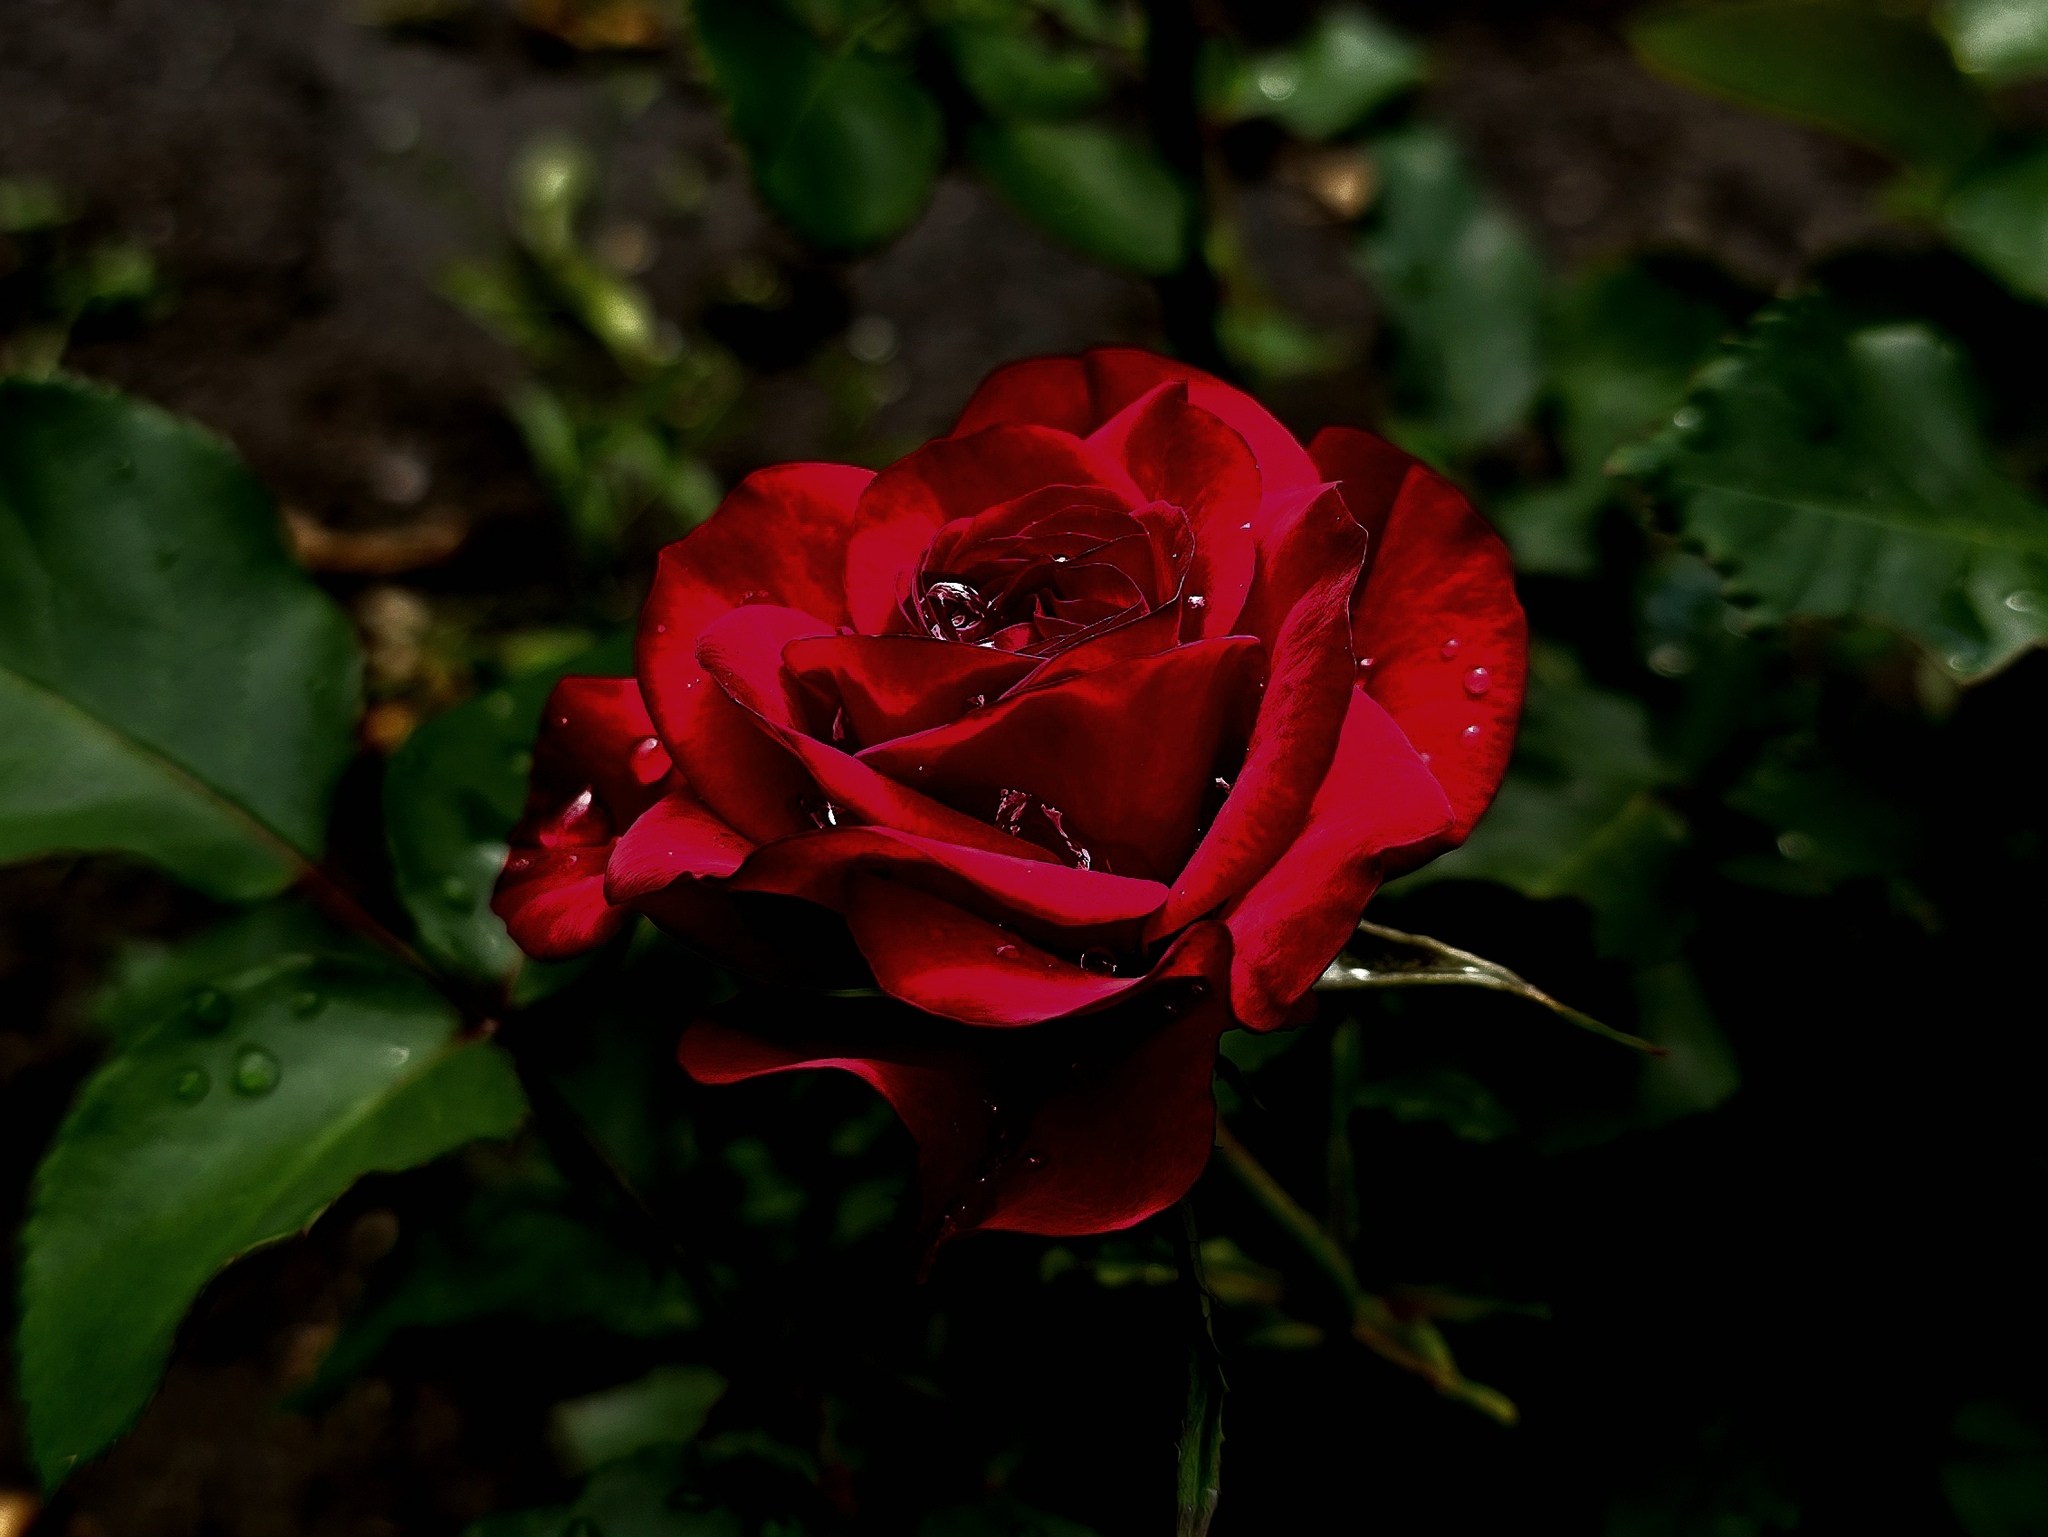 Just a rose in the park near the house - My, Mobile photography, The photo, Plants, Saint Petersburg, Flowers, Bloom, the Rose